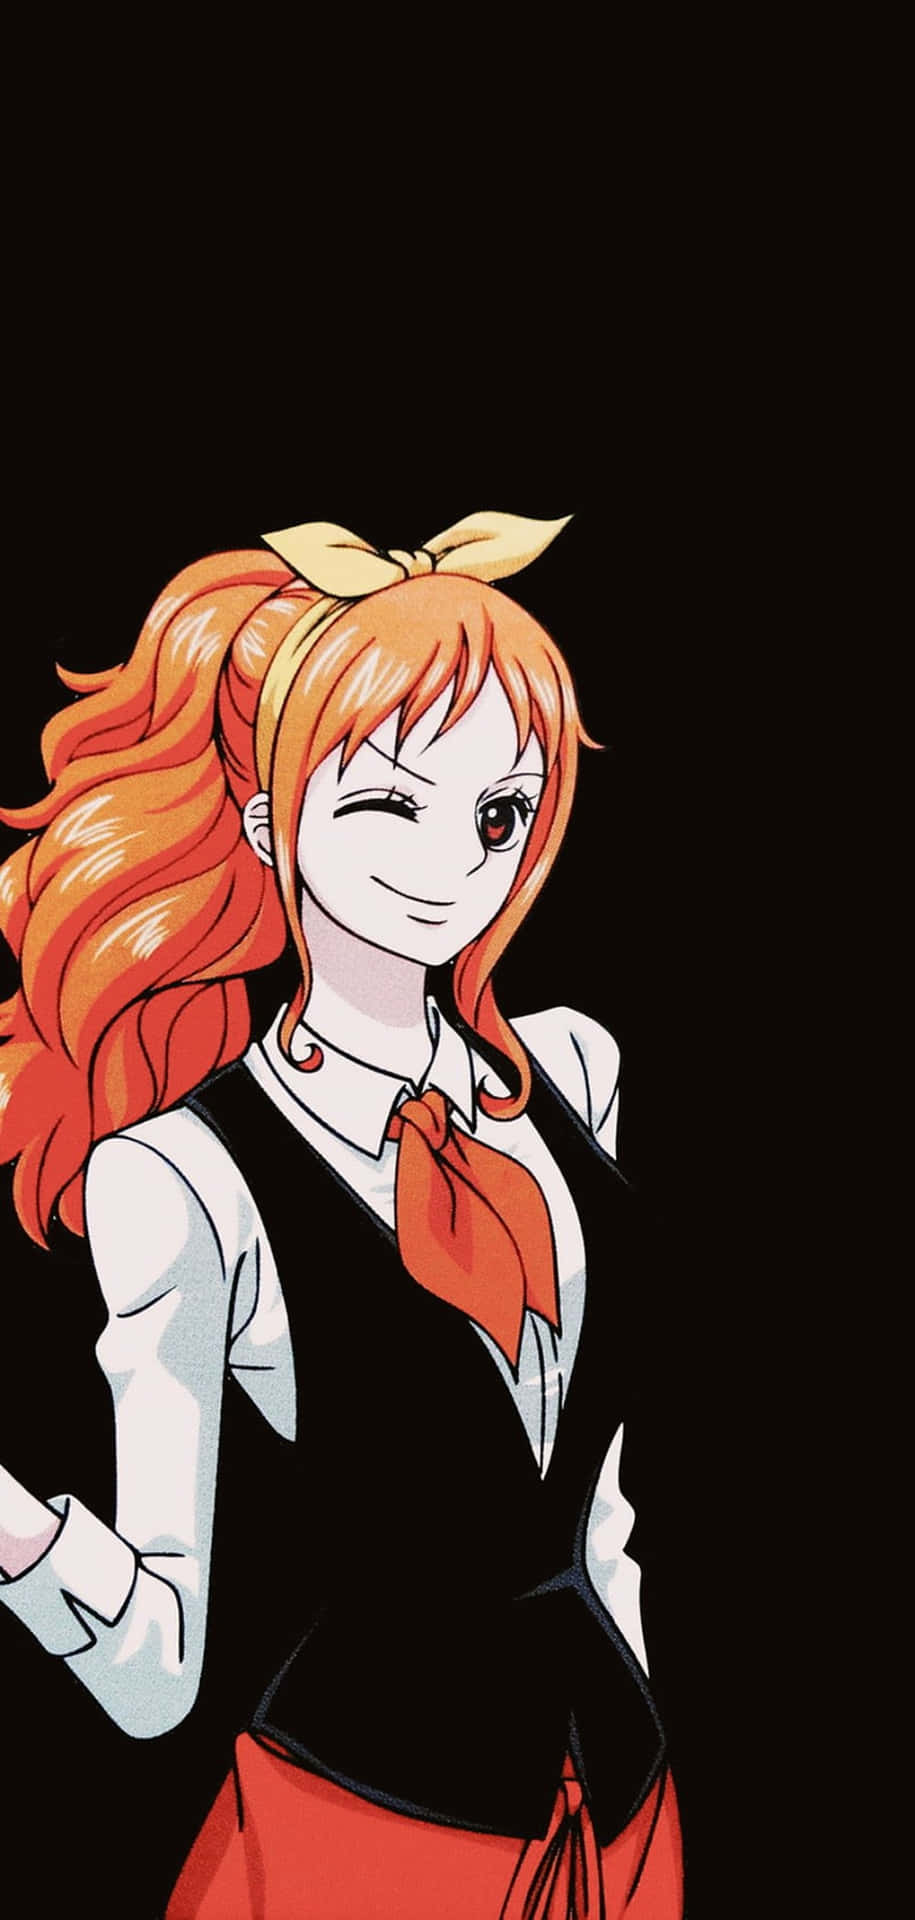 Nami One Piece With Yellow Hair Tie Ribbon Wallpaper